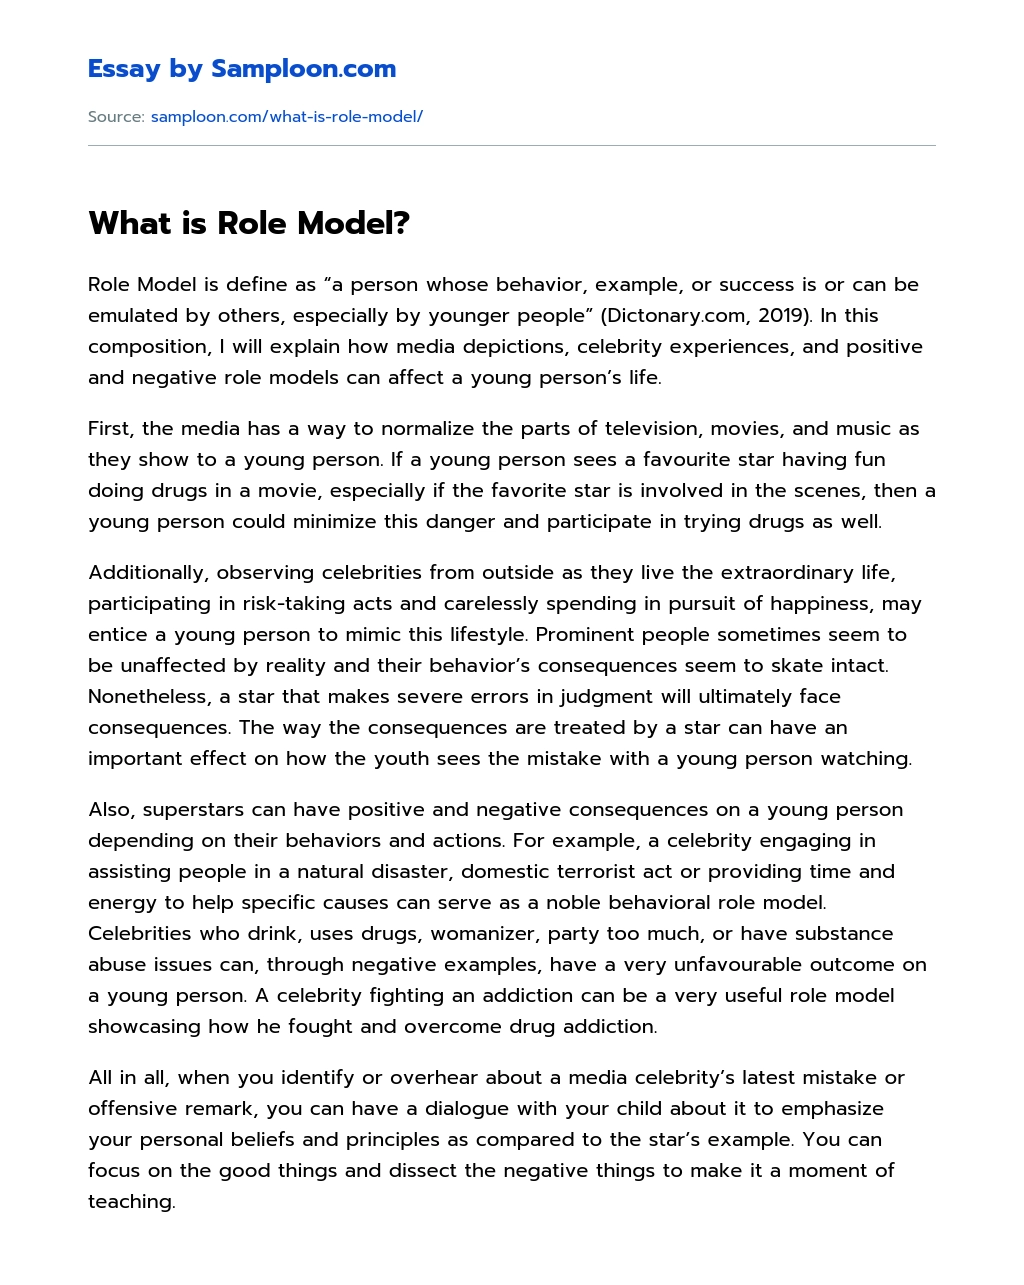 What is Role Model? essay